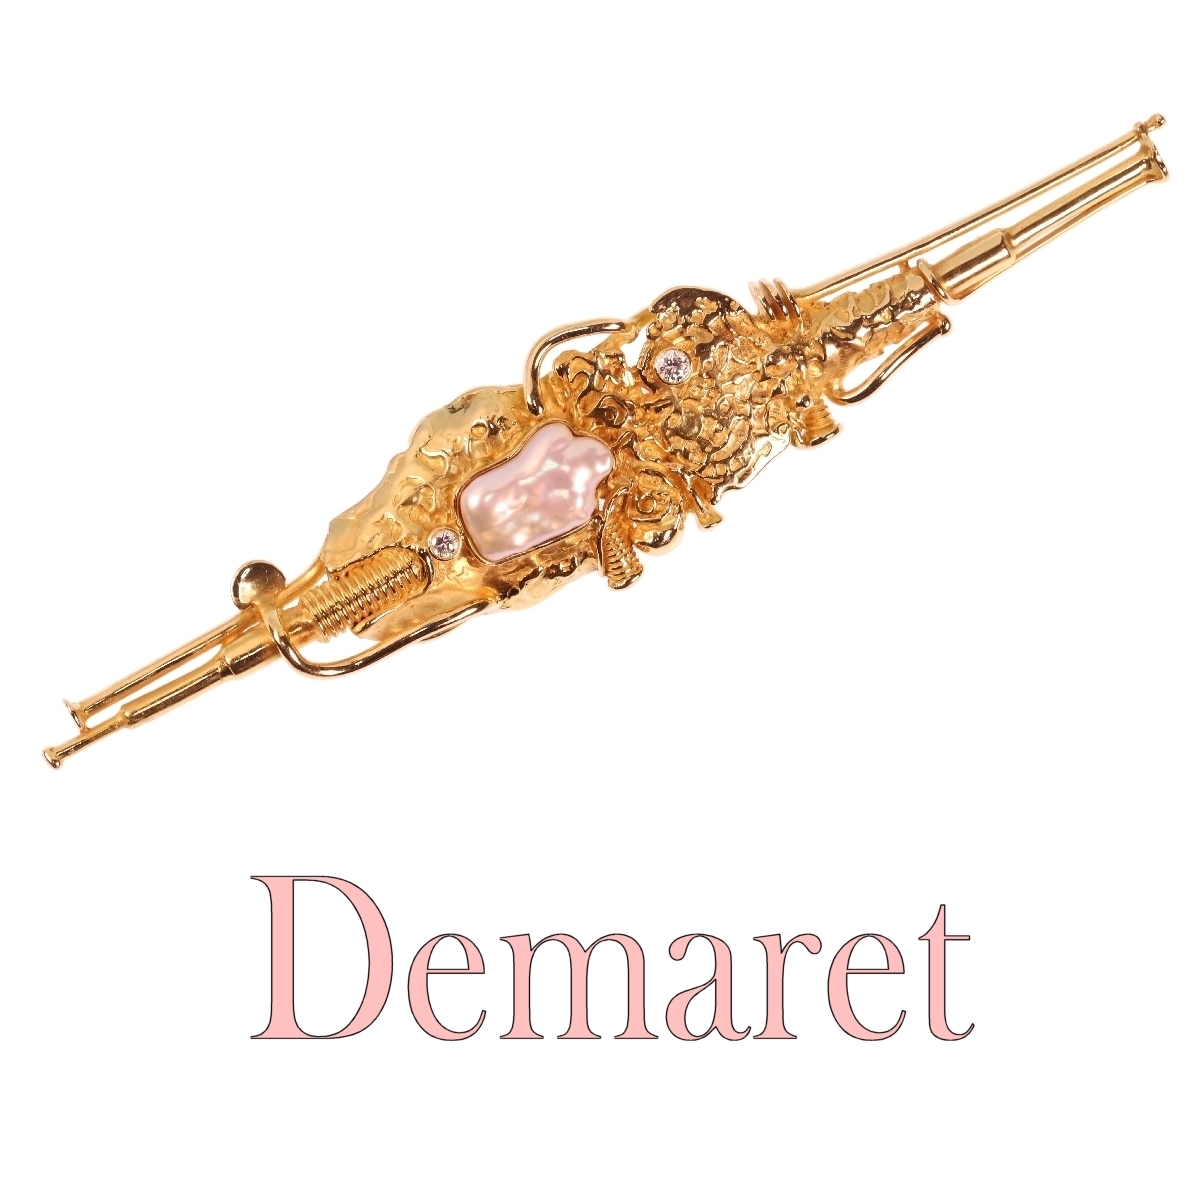 Artist Jewelry Signed Demaret Modernistic gold bar brooch with brilliants pearl